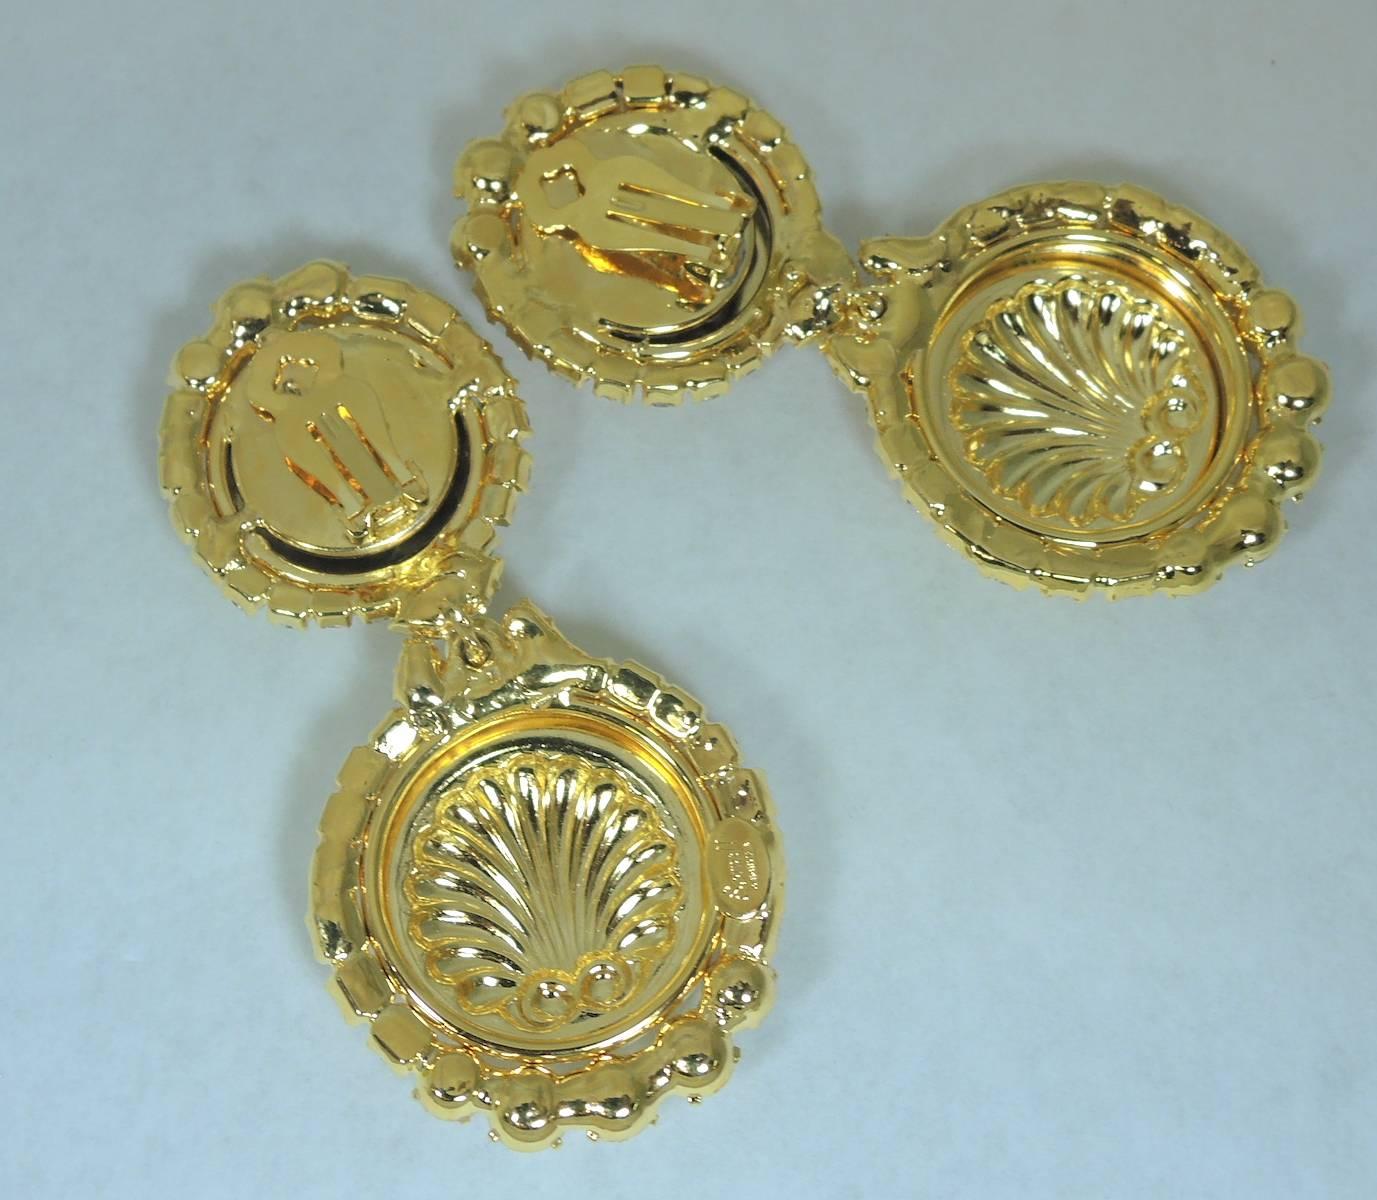 These are a beautiful, one of kind, clip earrings by Robert Sorrell. They feature two circular discs adorned with sparkling crystal accents and seashells. They measure 3-1/2” x 3/8”. They are in a gold tone setting and are signed “Sorrell